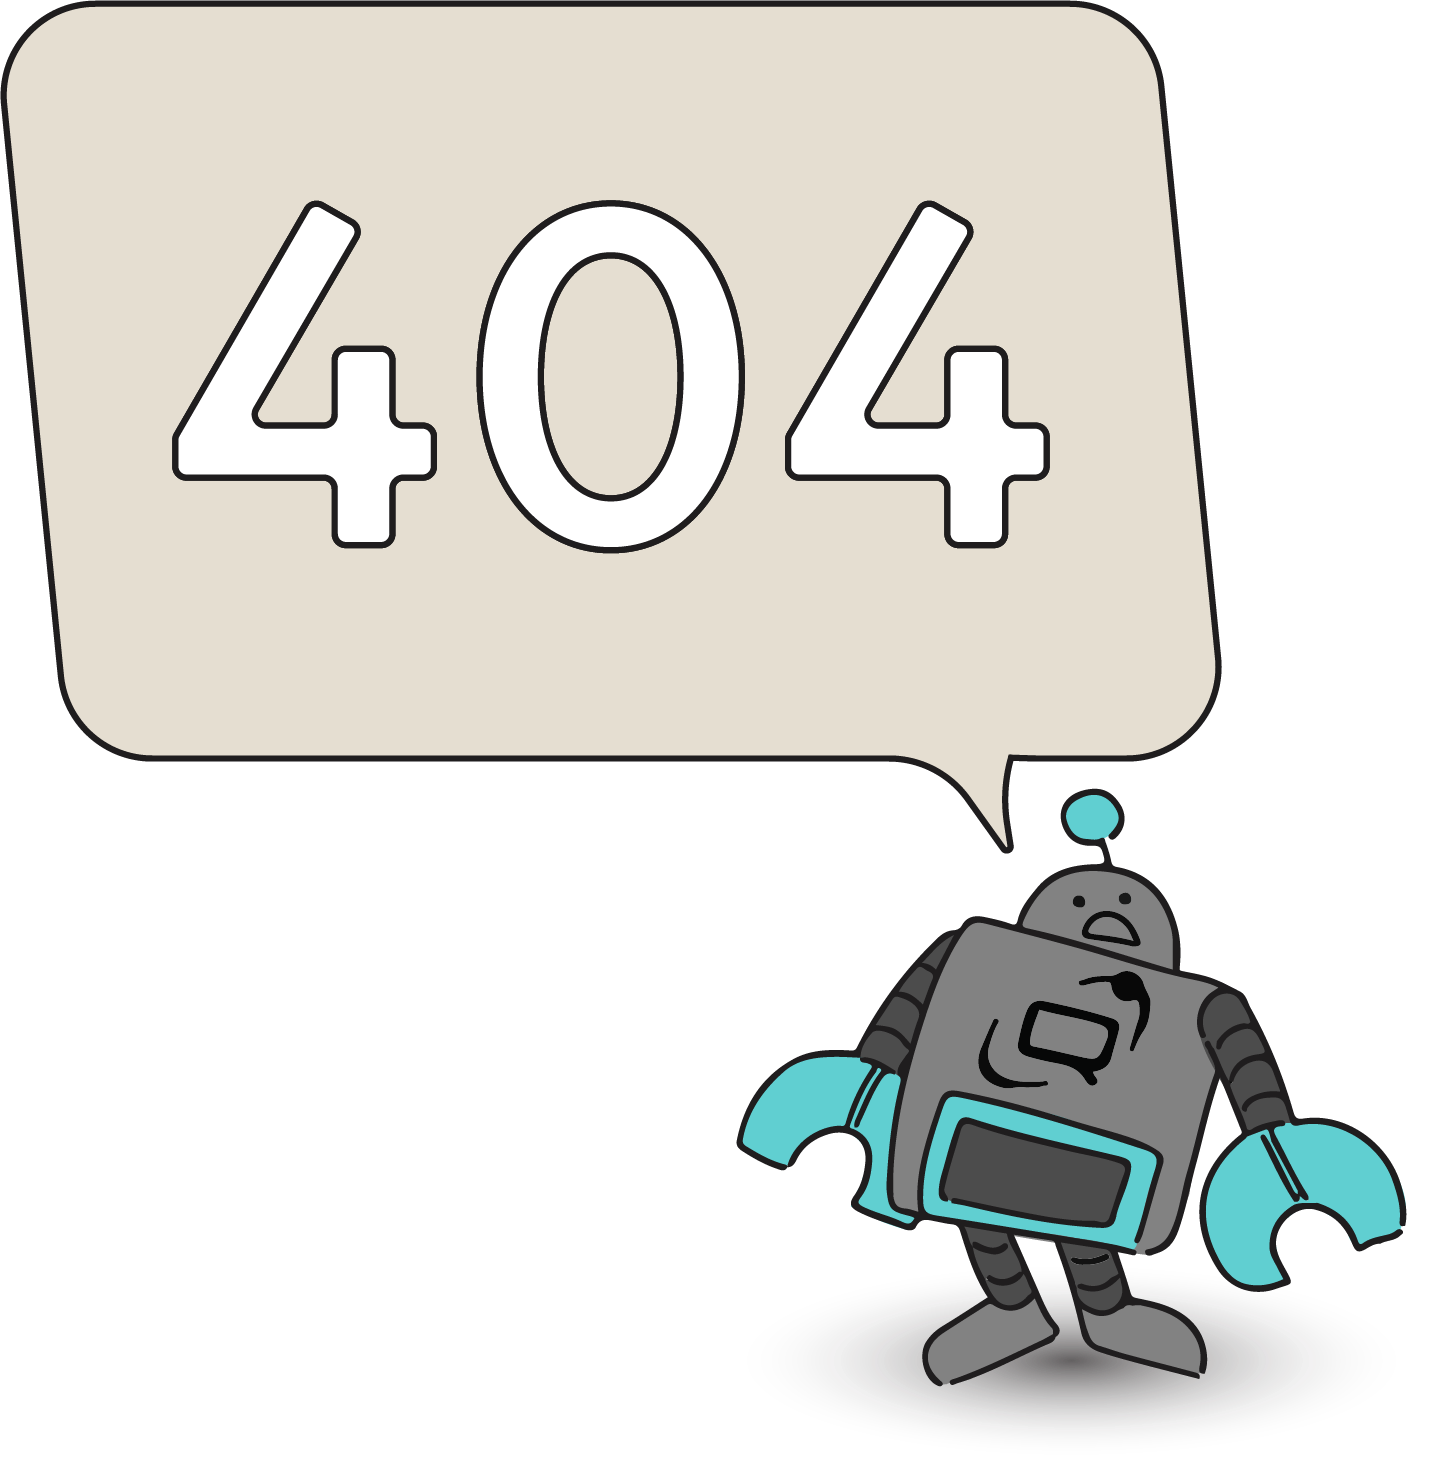 QuantCDN 404 page graphic with cartoon robot